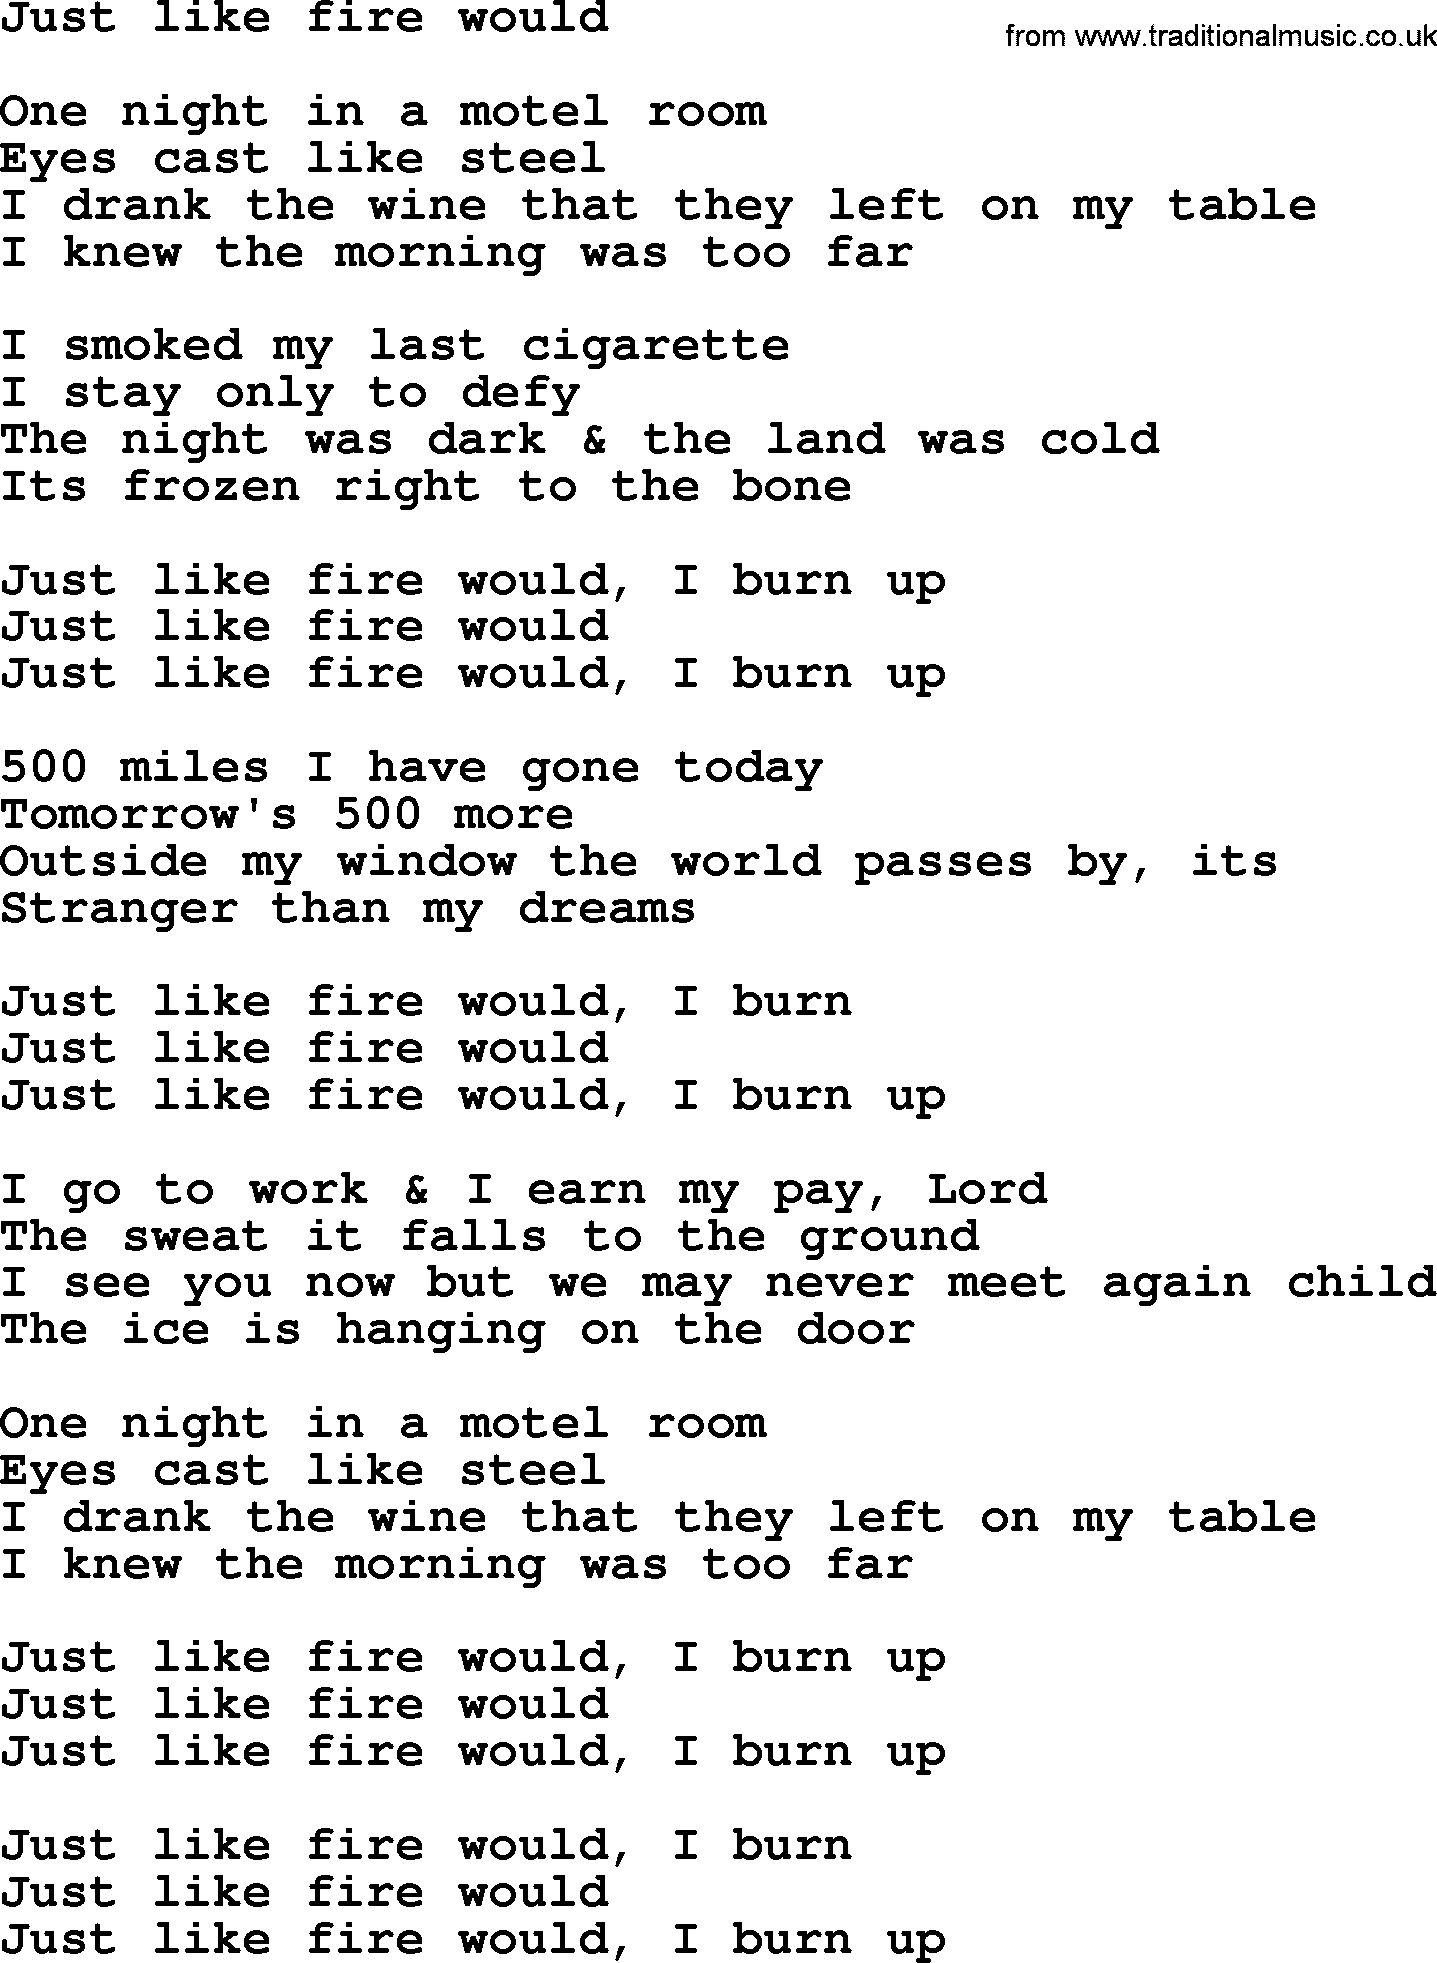 Bruce Springsteen song: Just Like Fire Would lyrics